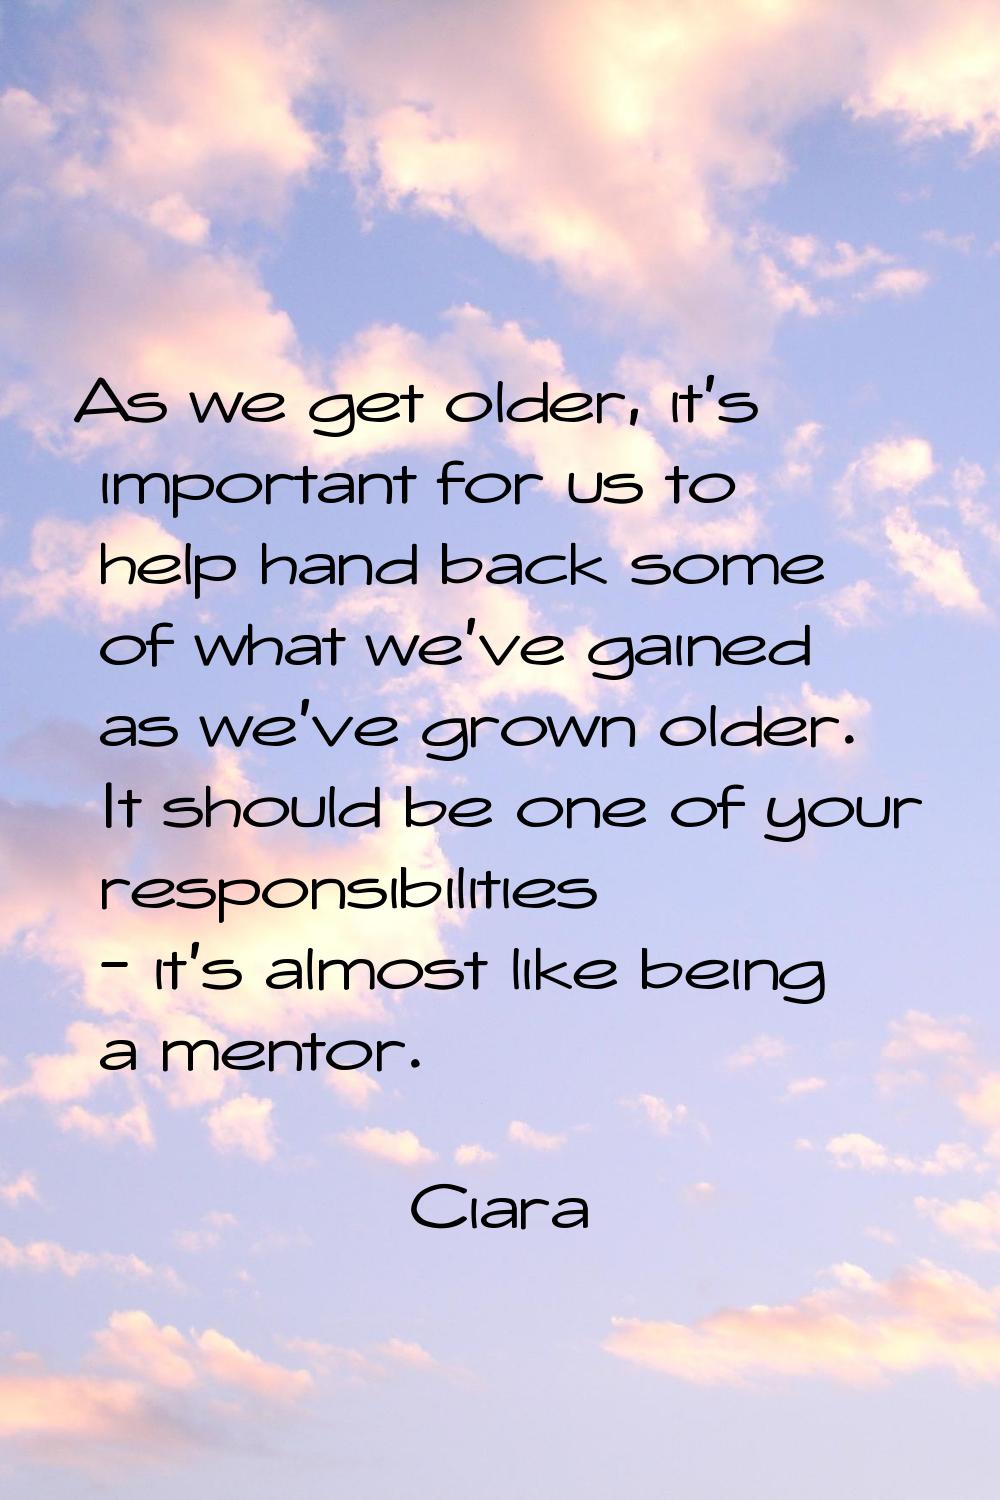 As we get older, it's important for us to help hand back some of what we've gained as we've grown o